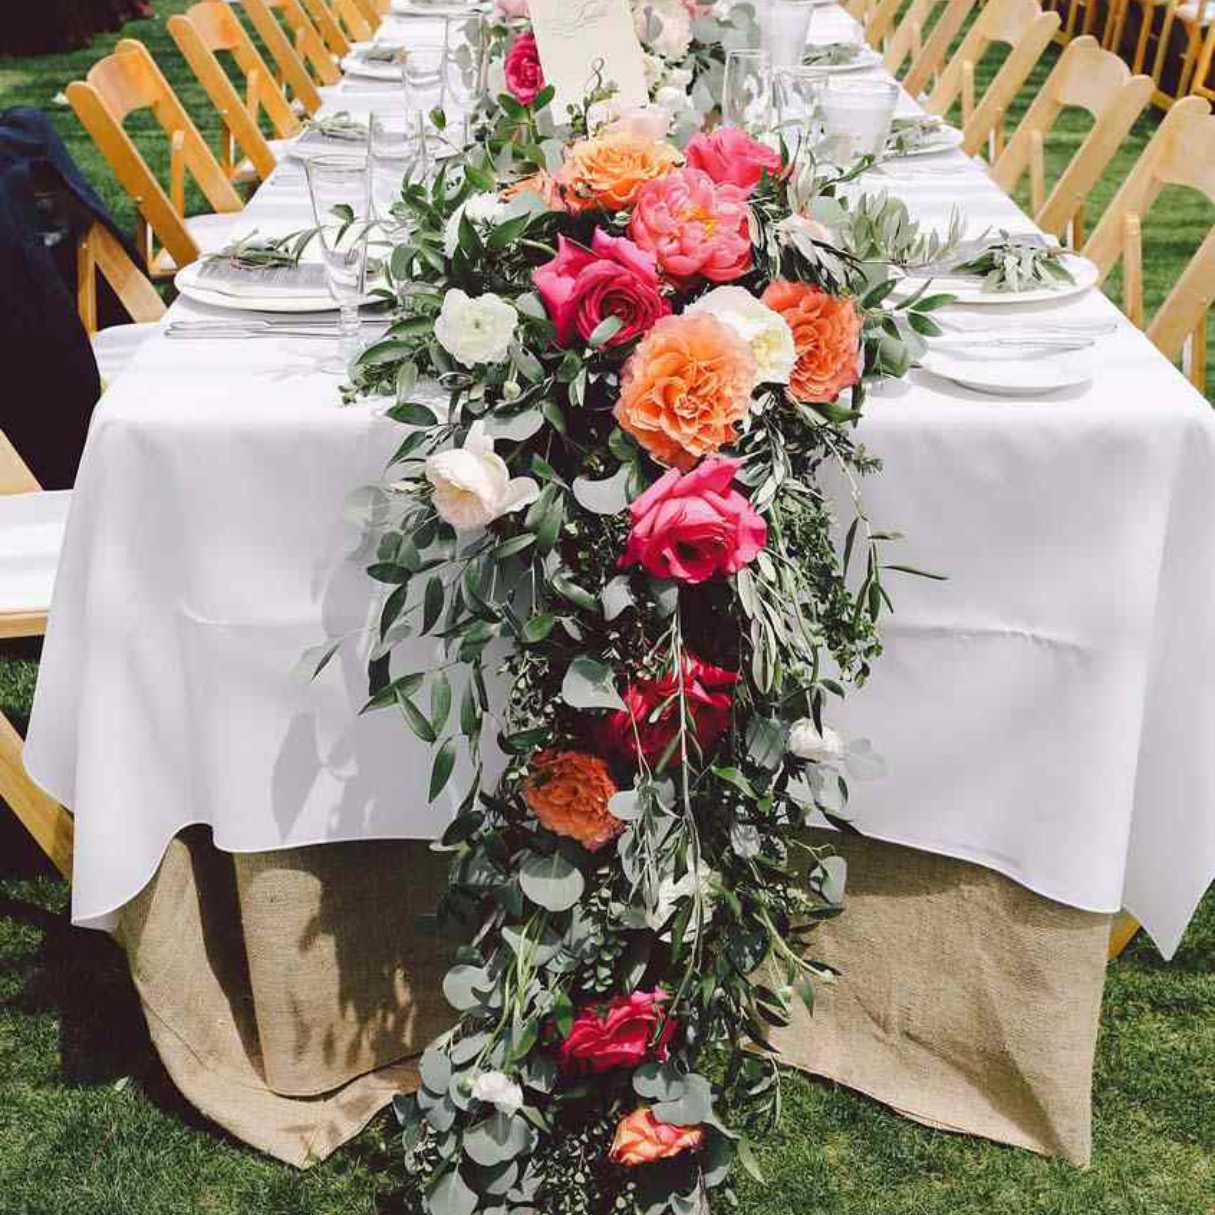 How To Make Table Runners From Greens And Flowers